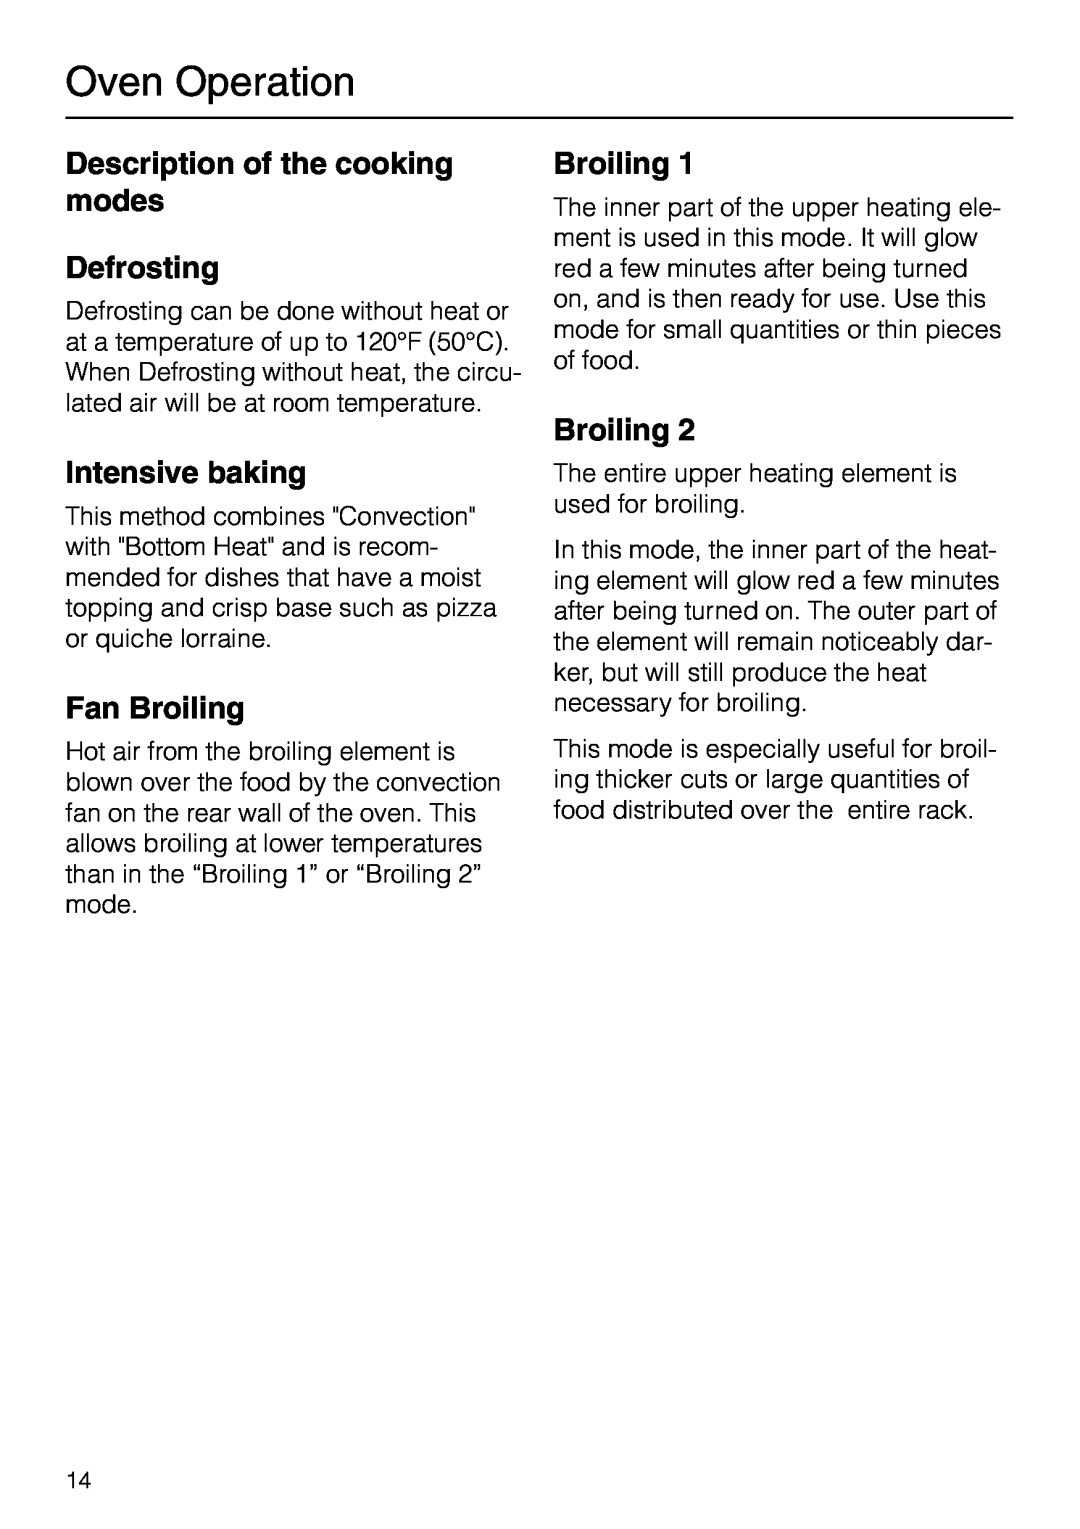 Miele H 267 B, H 277 B manual Description of the cooking modes Defrosting, Intensive baking, Fan Broiling, Oven Operation 